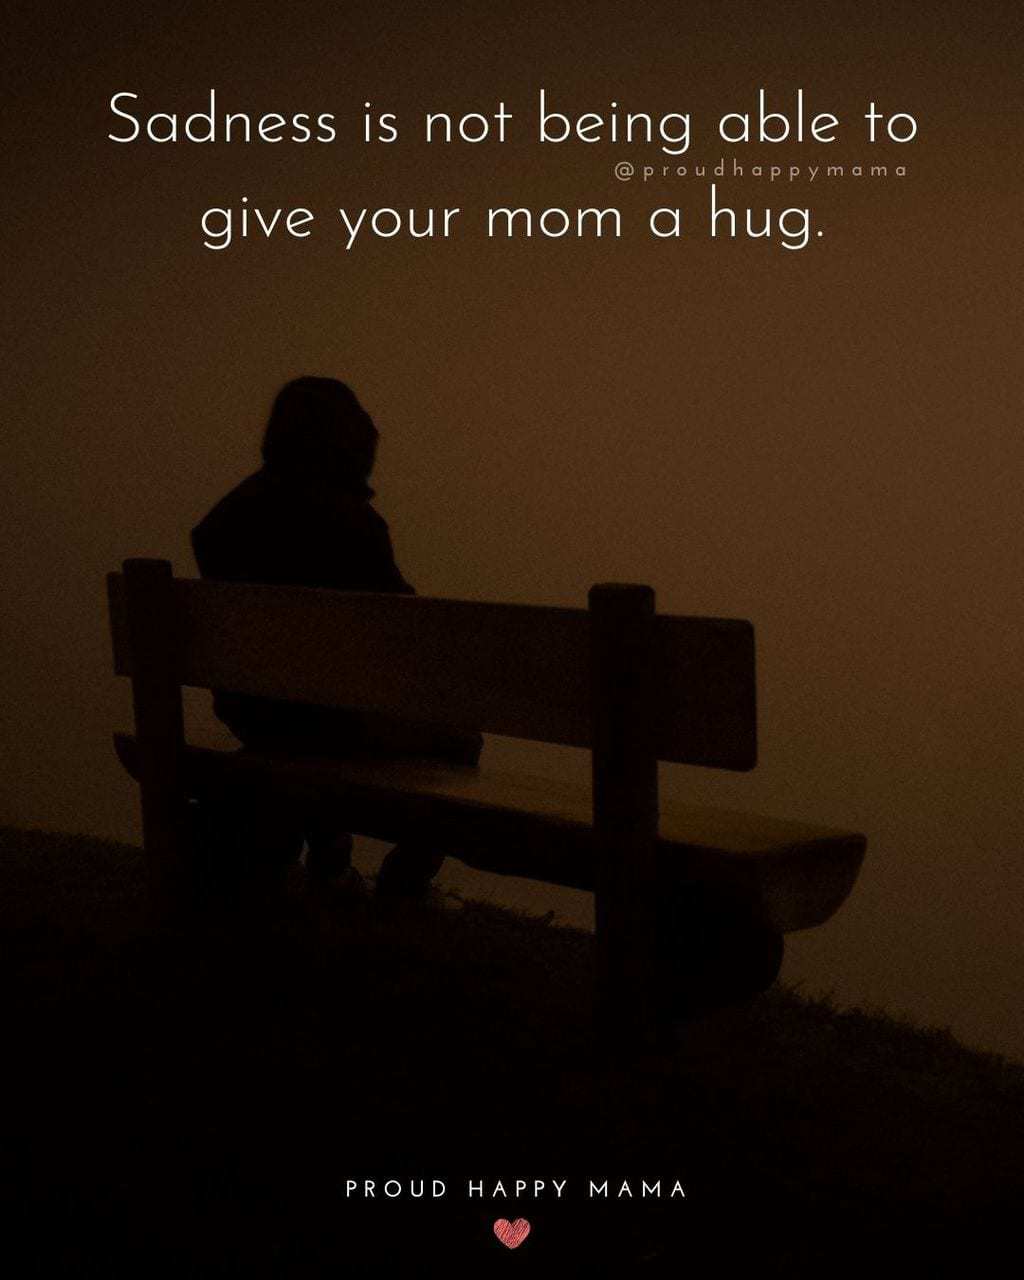 Shadow of a  person sitting on a bench outside with text overlay. 'Sadness is not being able to give your mom a hug.’